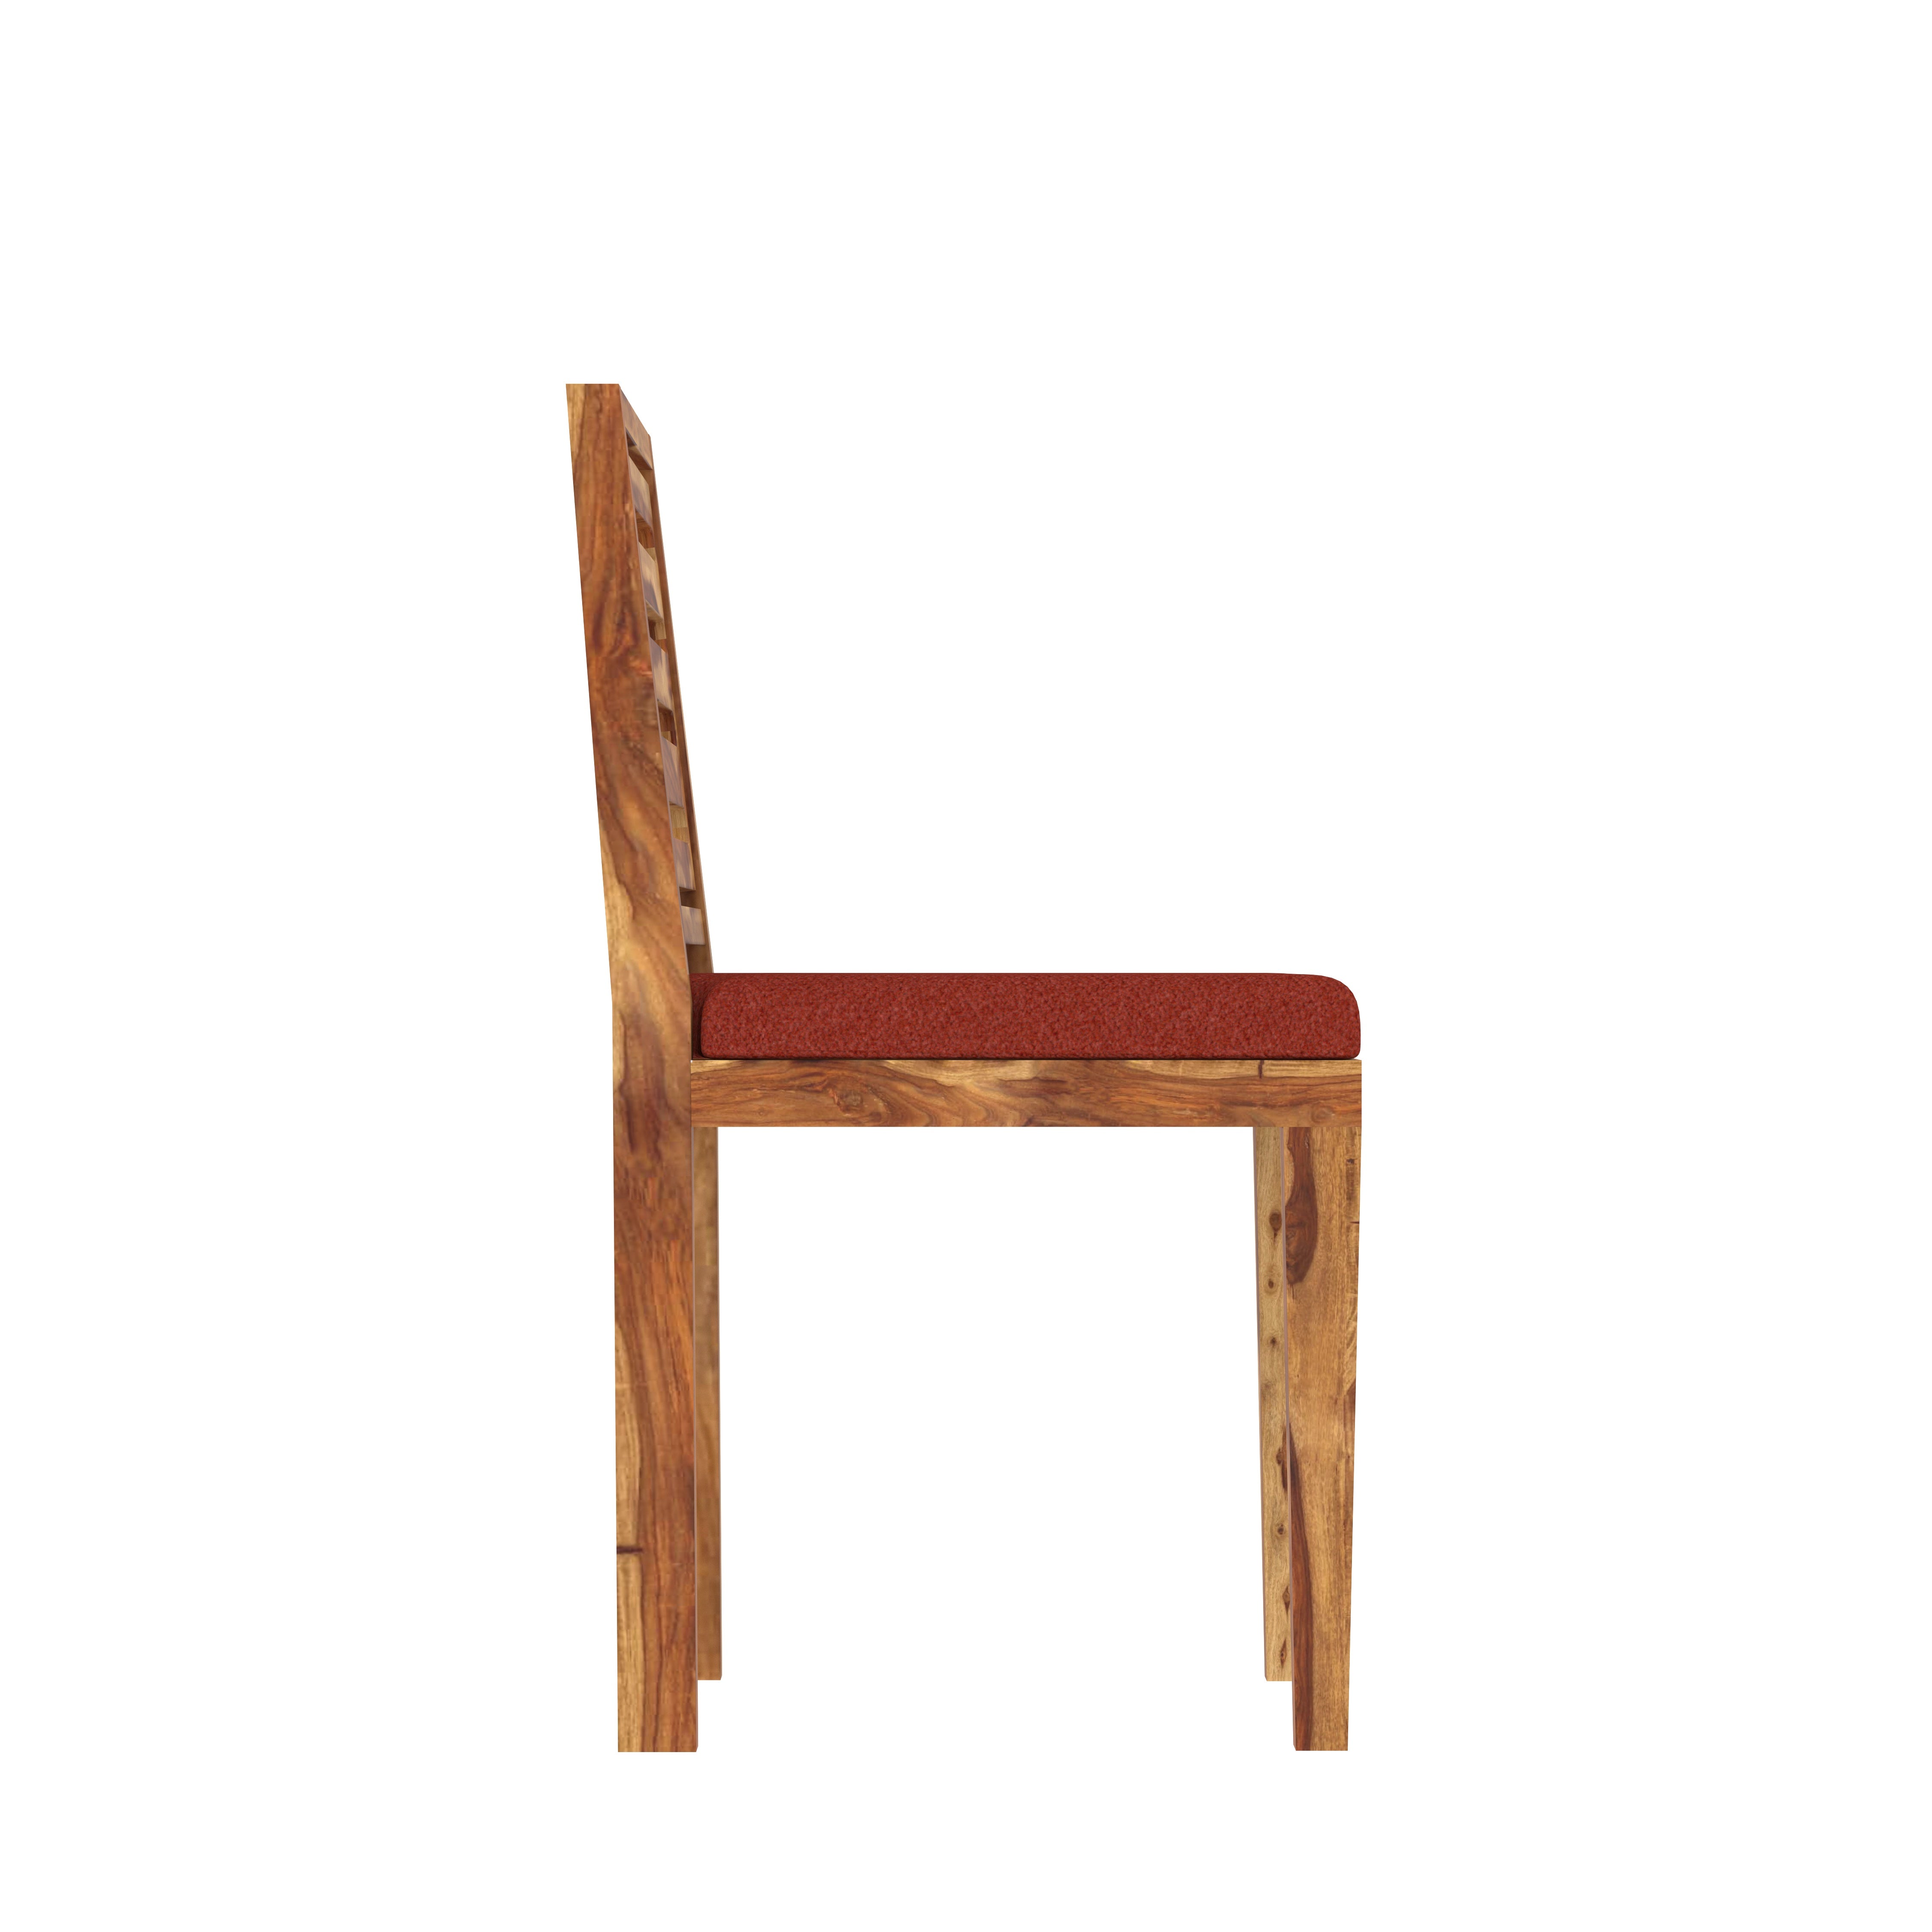 Montage Stripped Finished Wooden Handmade Simple Chair Dining Chair